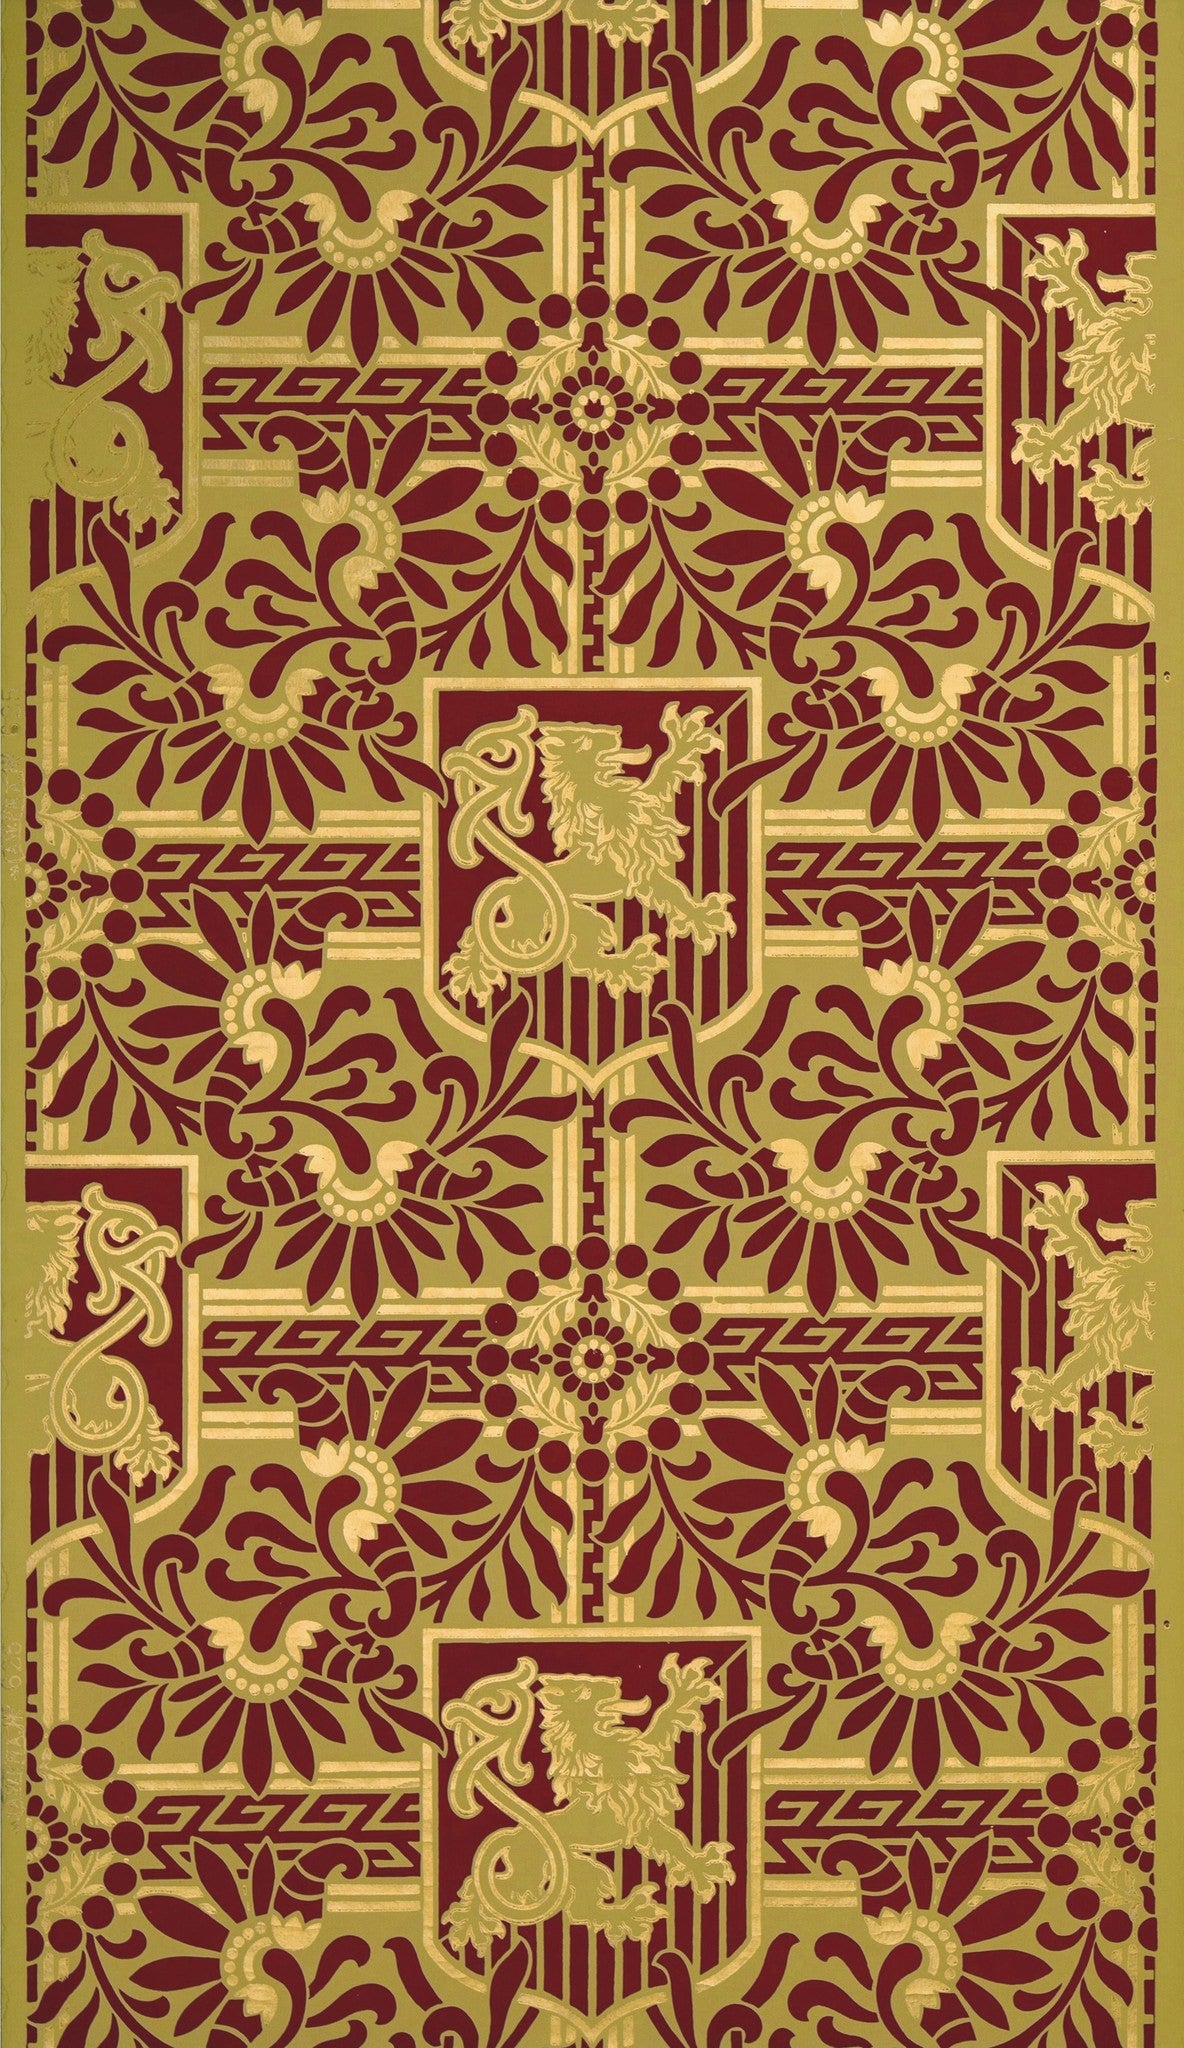 Heraldic with Gilt Rampant Lions - Antique Wallpaper Remnant